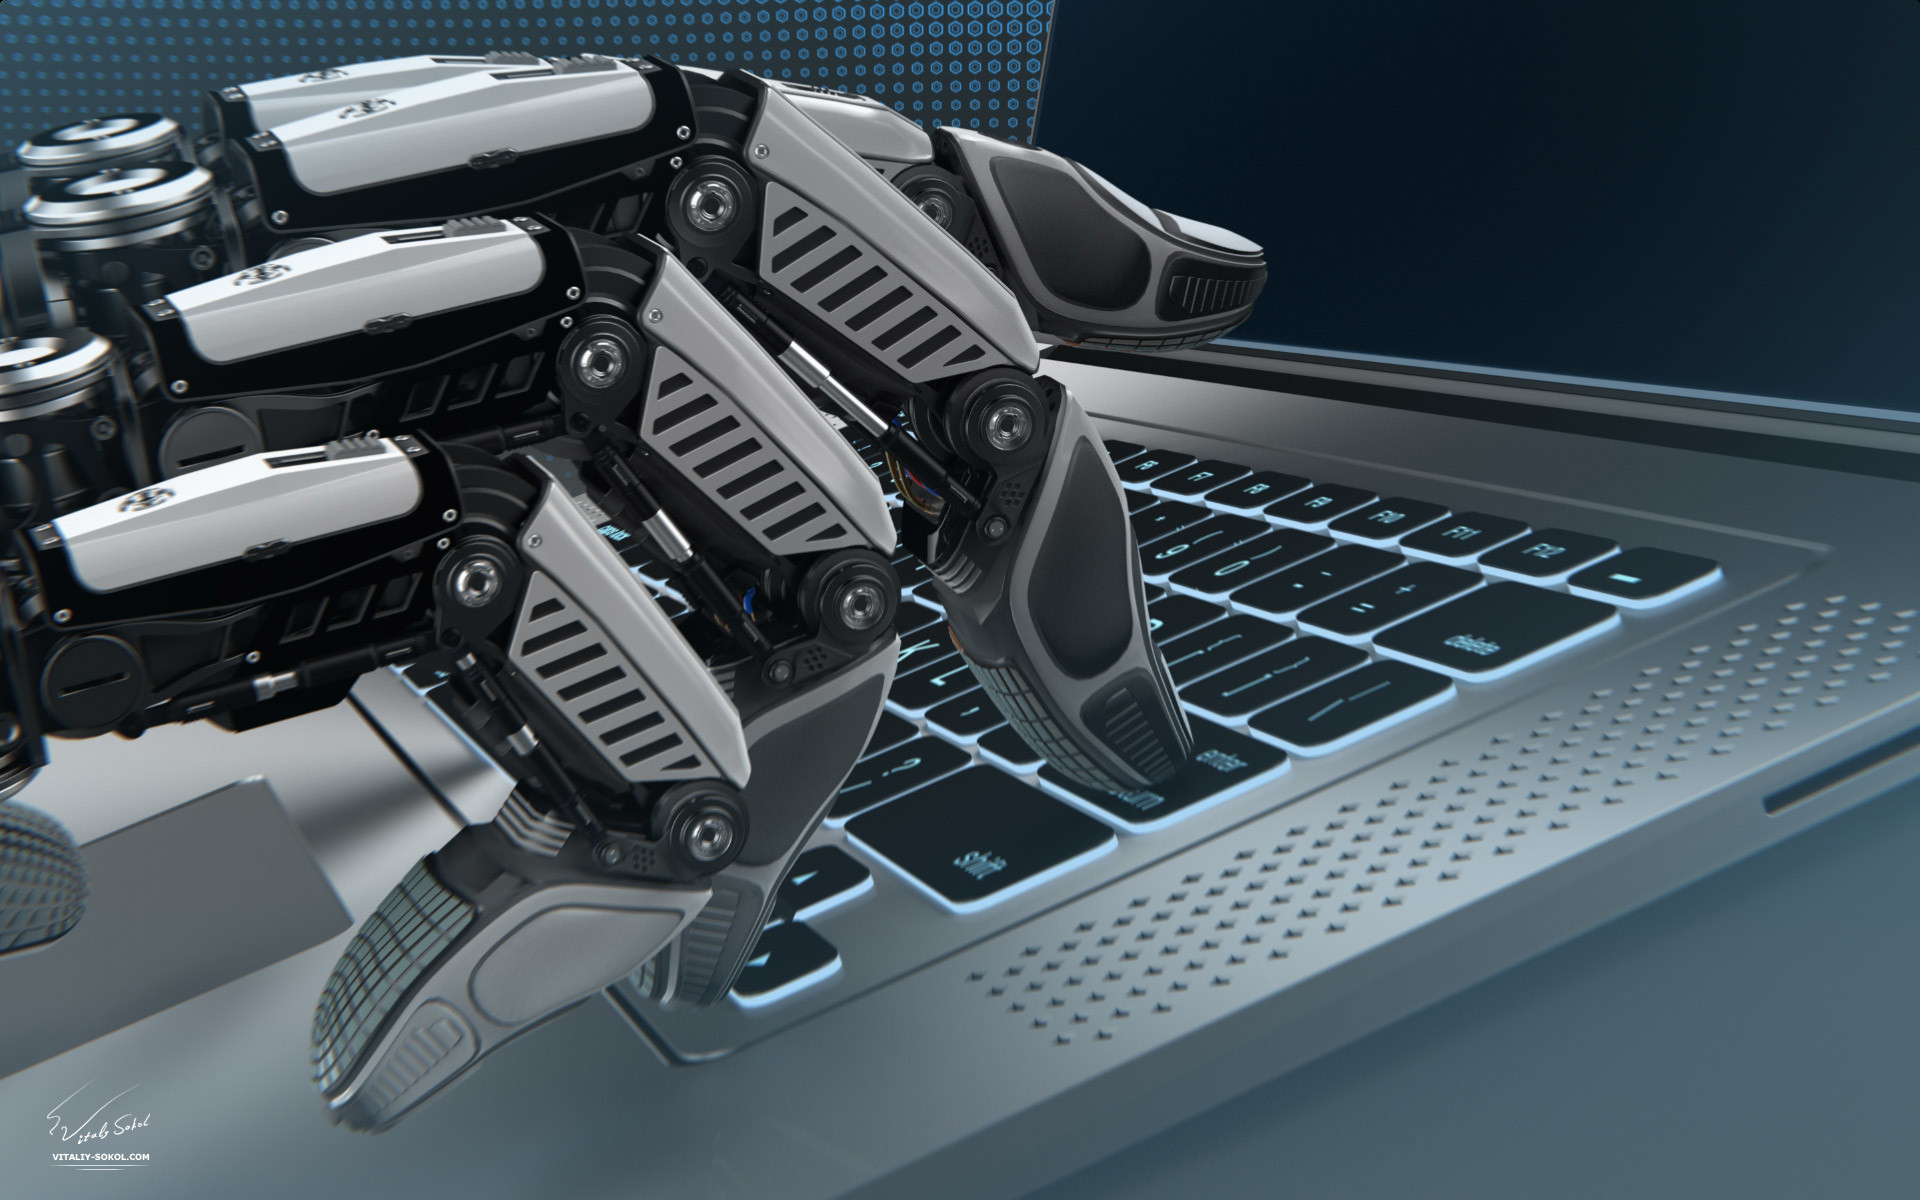 Highly detailed 3d model of robot arm working with laptop made with blender 2.78. Closeup render